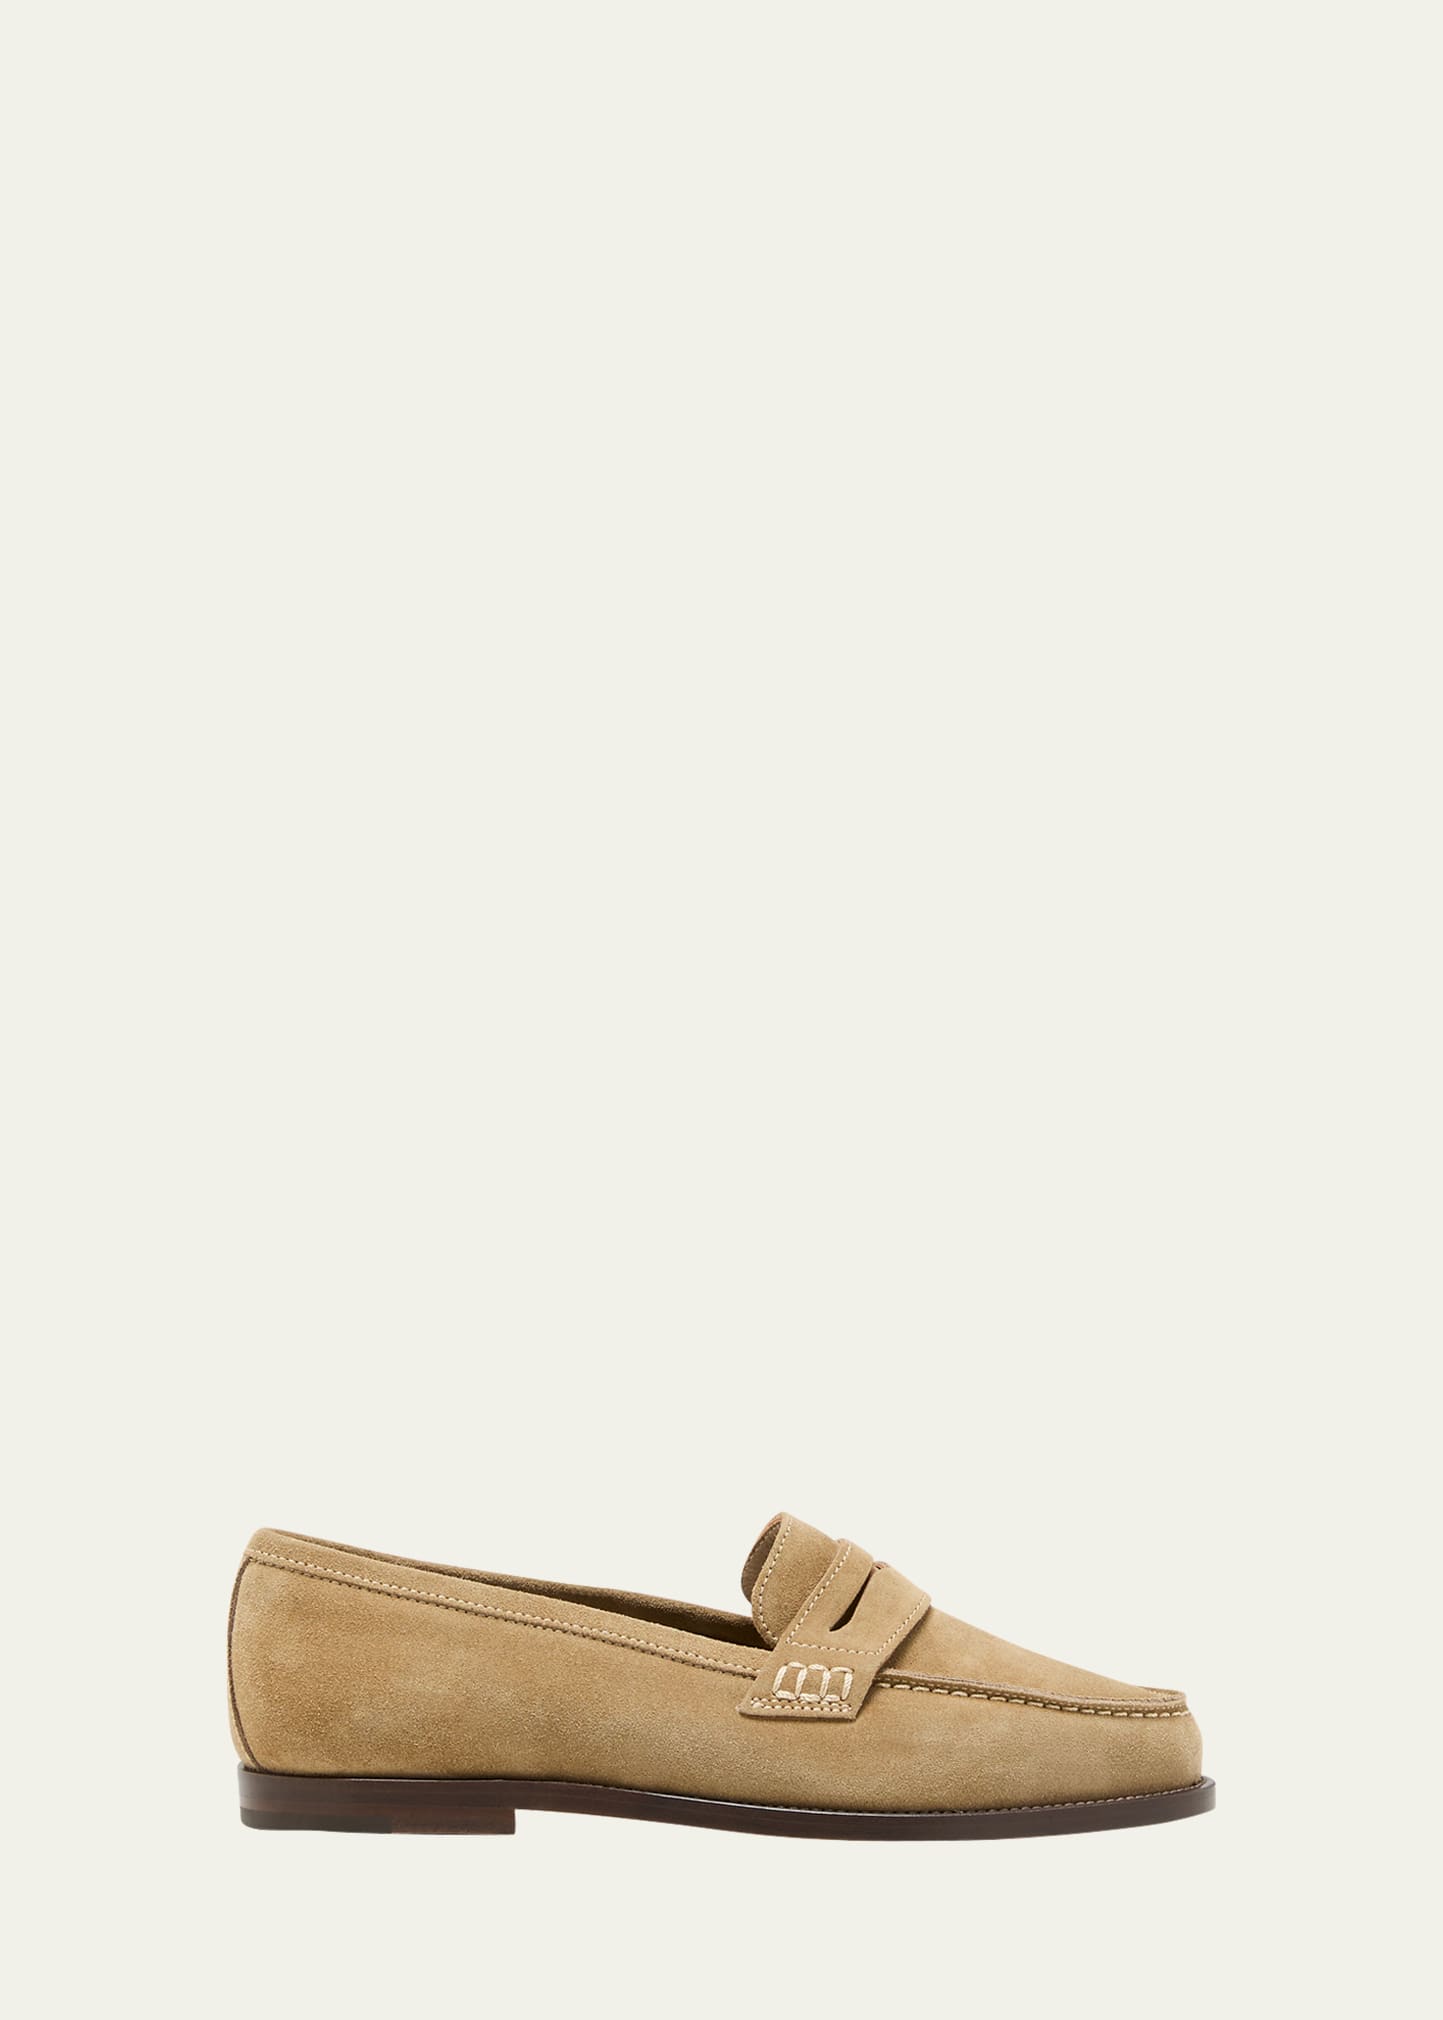 Perrita Classic Suede Penny Loafers